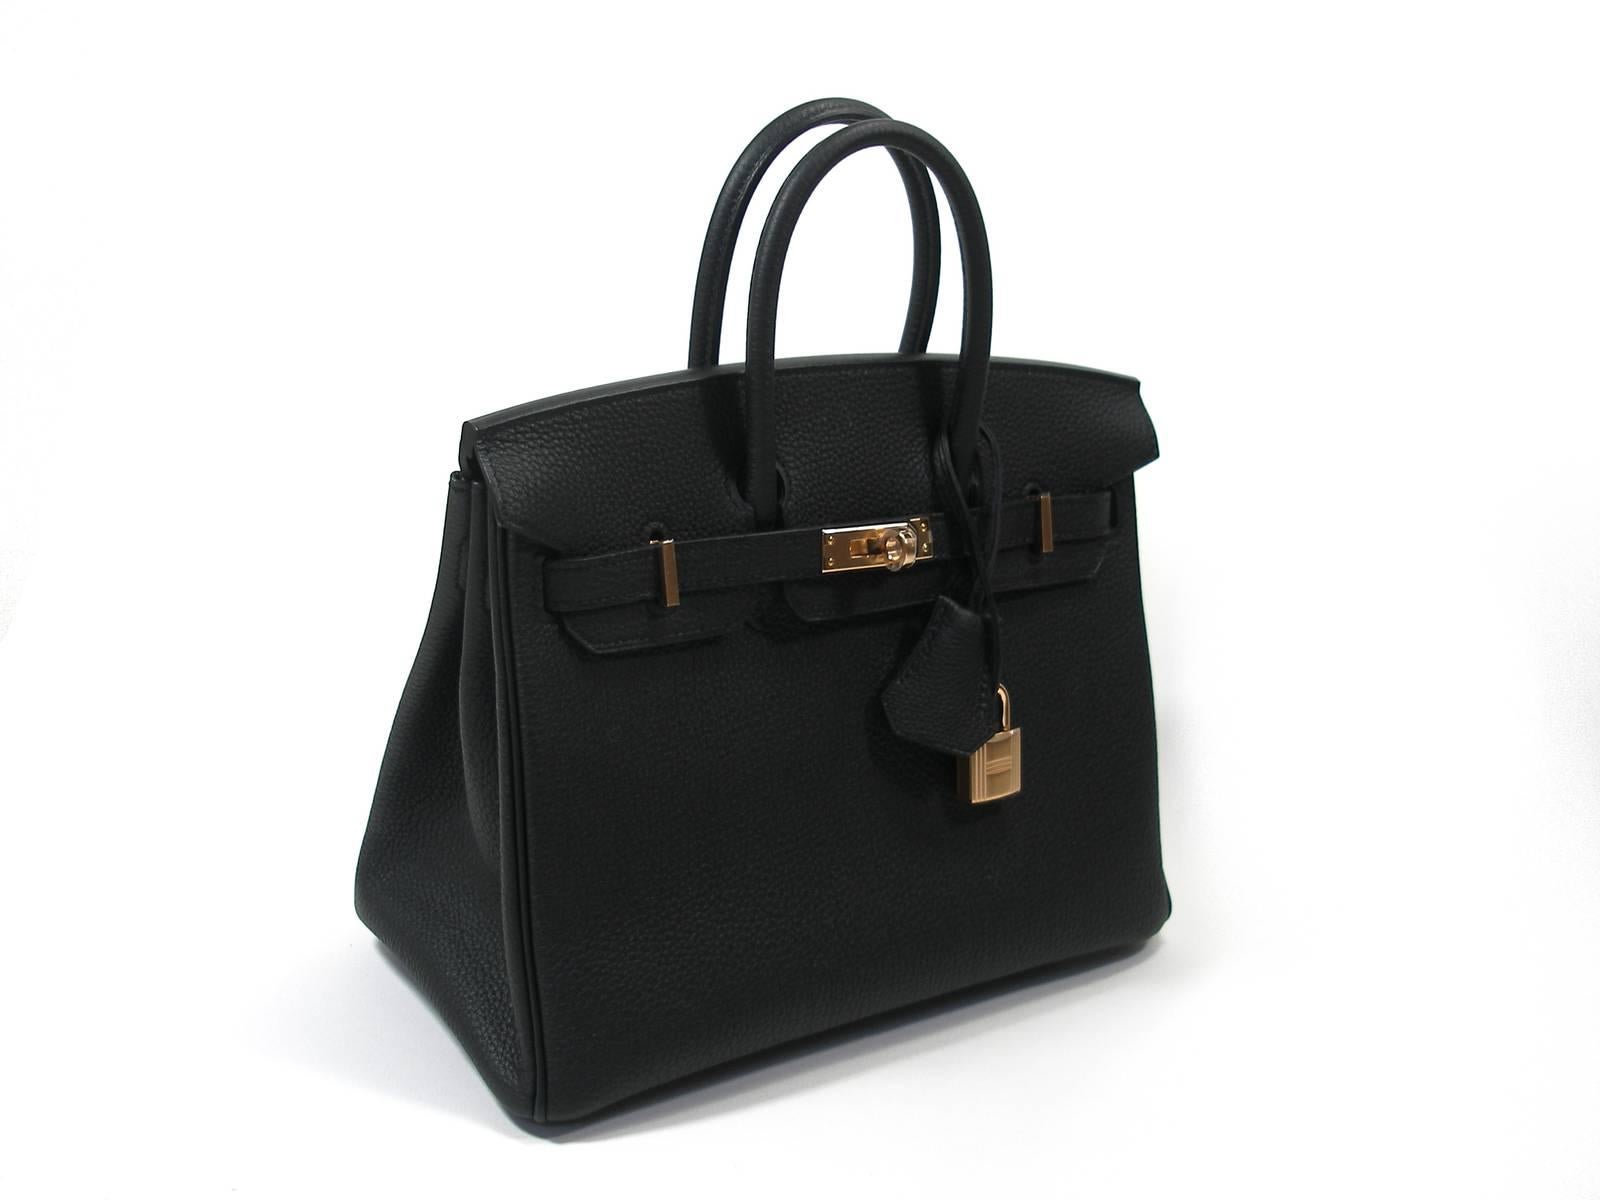 RARE PIÈCE , difficulte to find.
Hermès Birkin Bag 25 cm 
Absoluty Brand New 
Condition : 10/10
Production 2019 
Plastic is still on hardware 
Colour:  black
Black Togo leather 
Togo Leather and permabrass ( champagne color ) hardware.
Matérial :